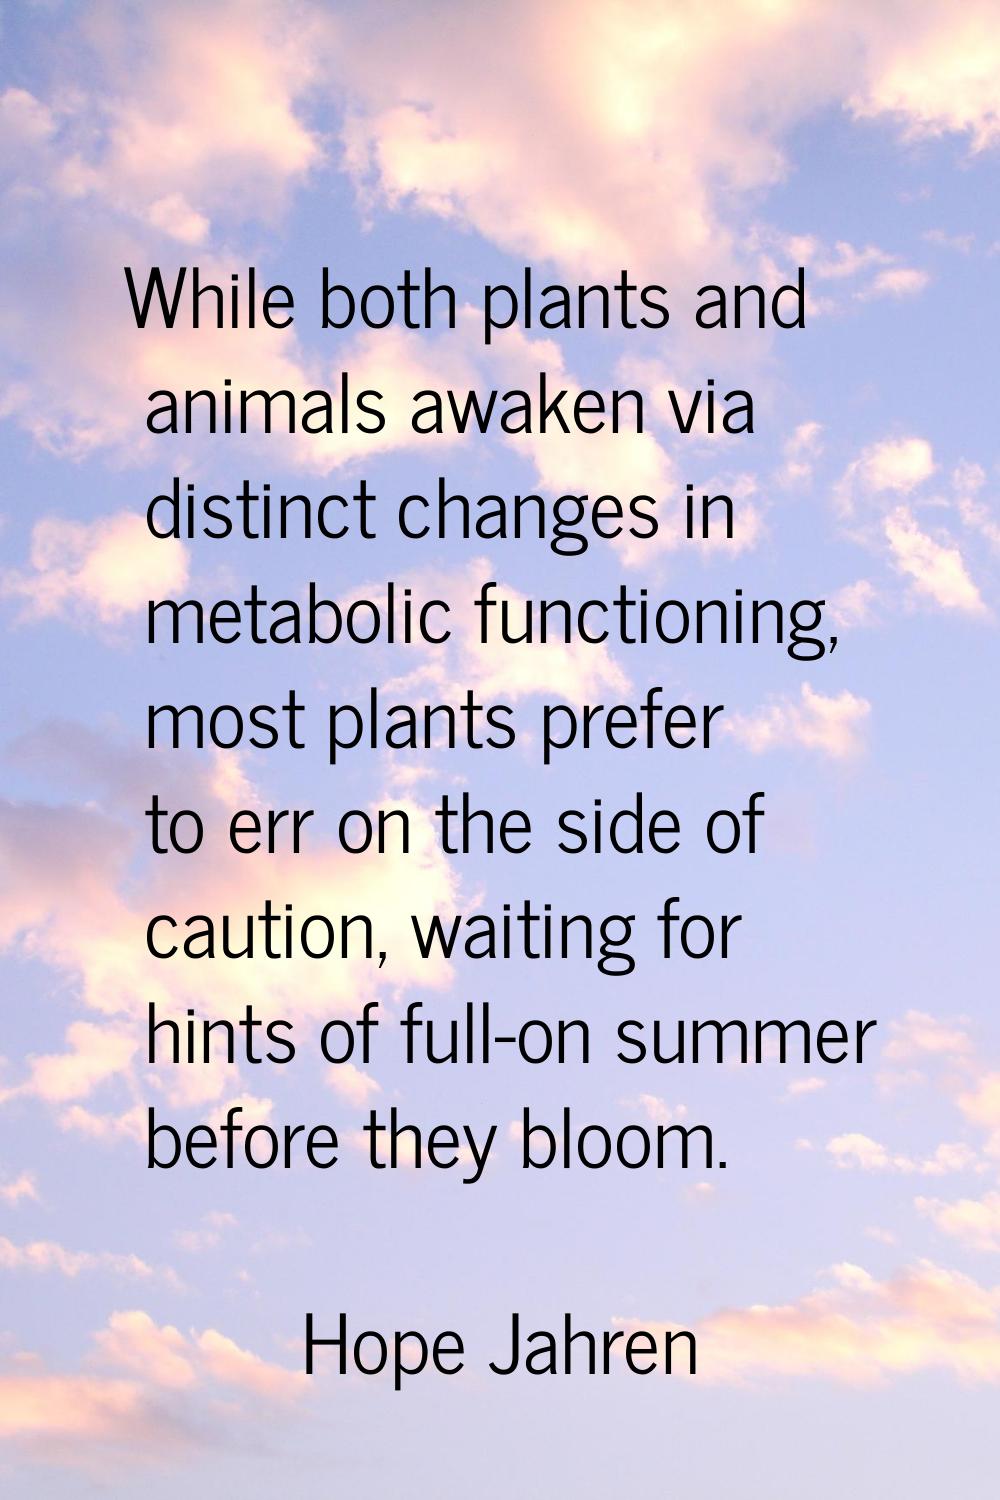 While both plants and animals awaken via distinct changes in metabolic functioning, most plants pre